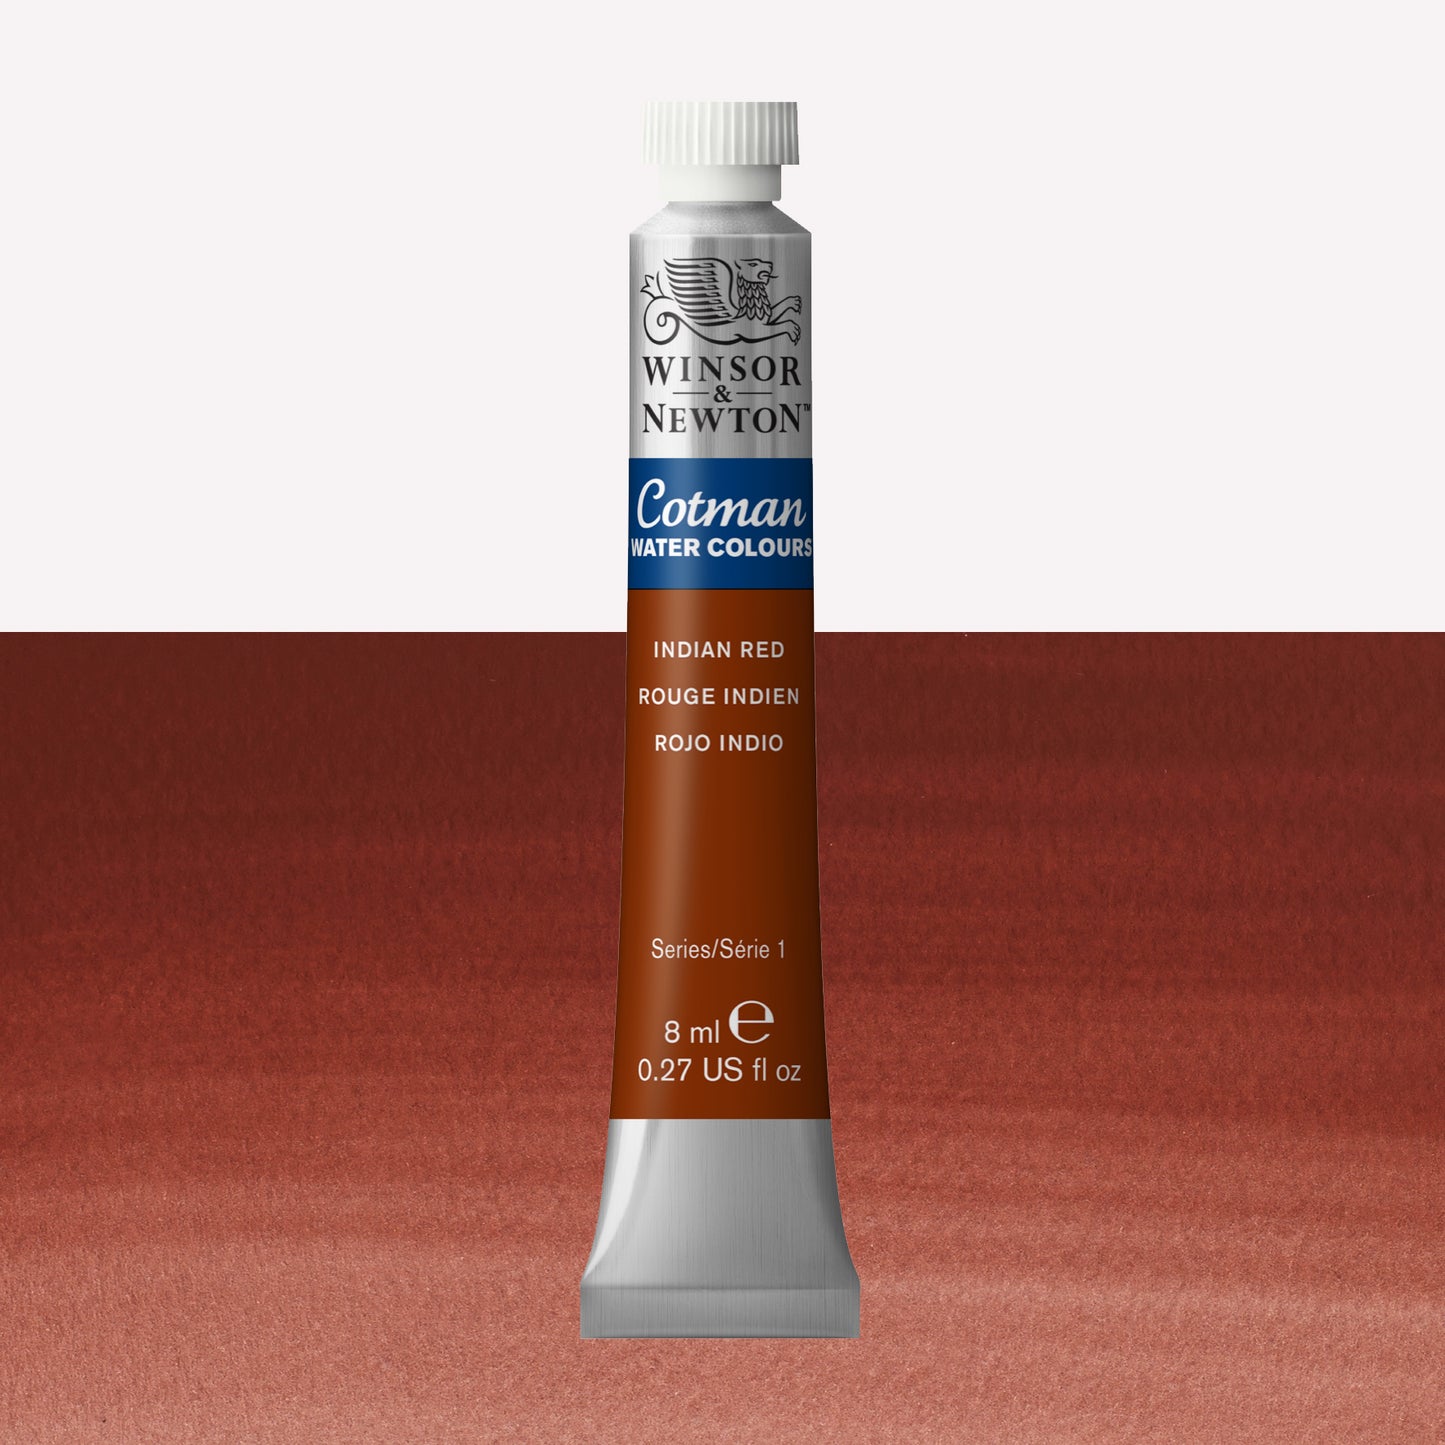 Winsor & Newton Cotman watercolour paint packaged in 8ml silver tube with a white lid in the shade Indian red over a highly pigmented colour swatch.